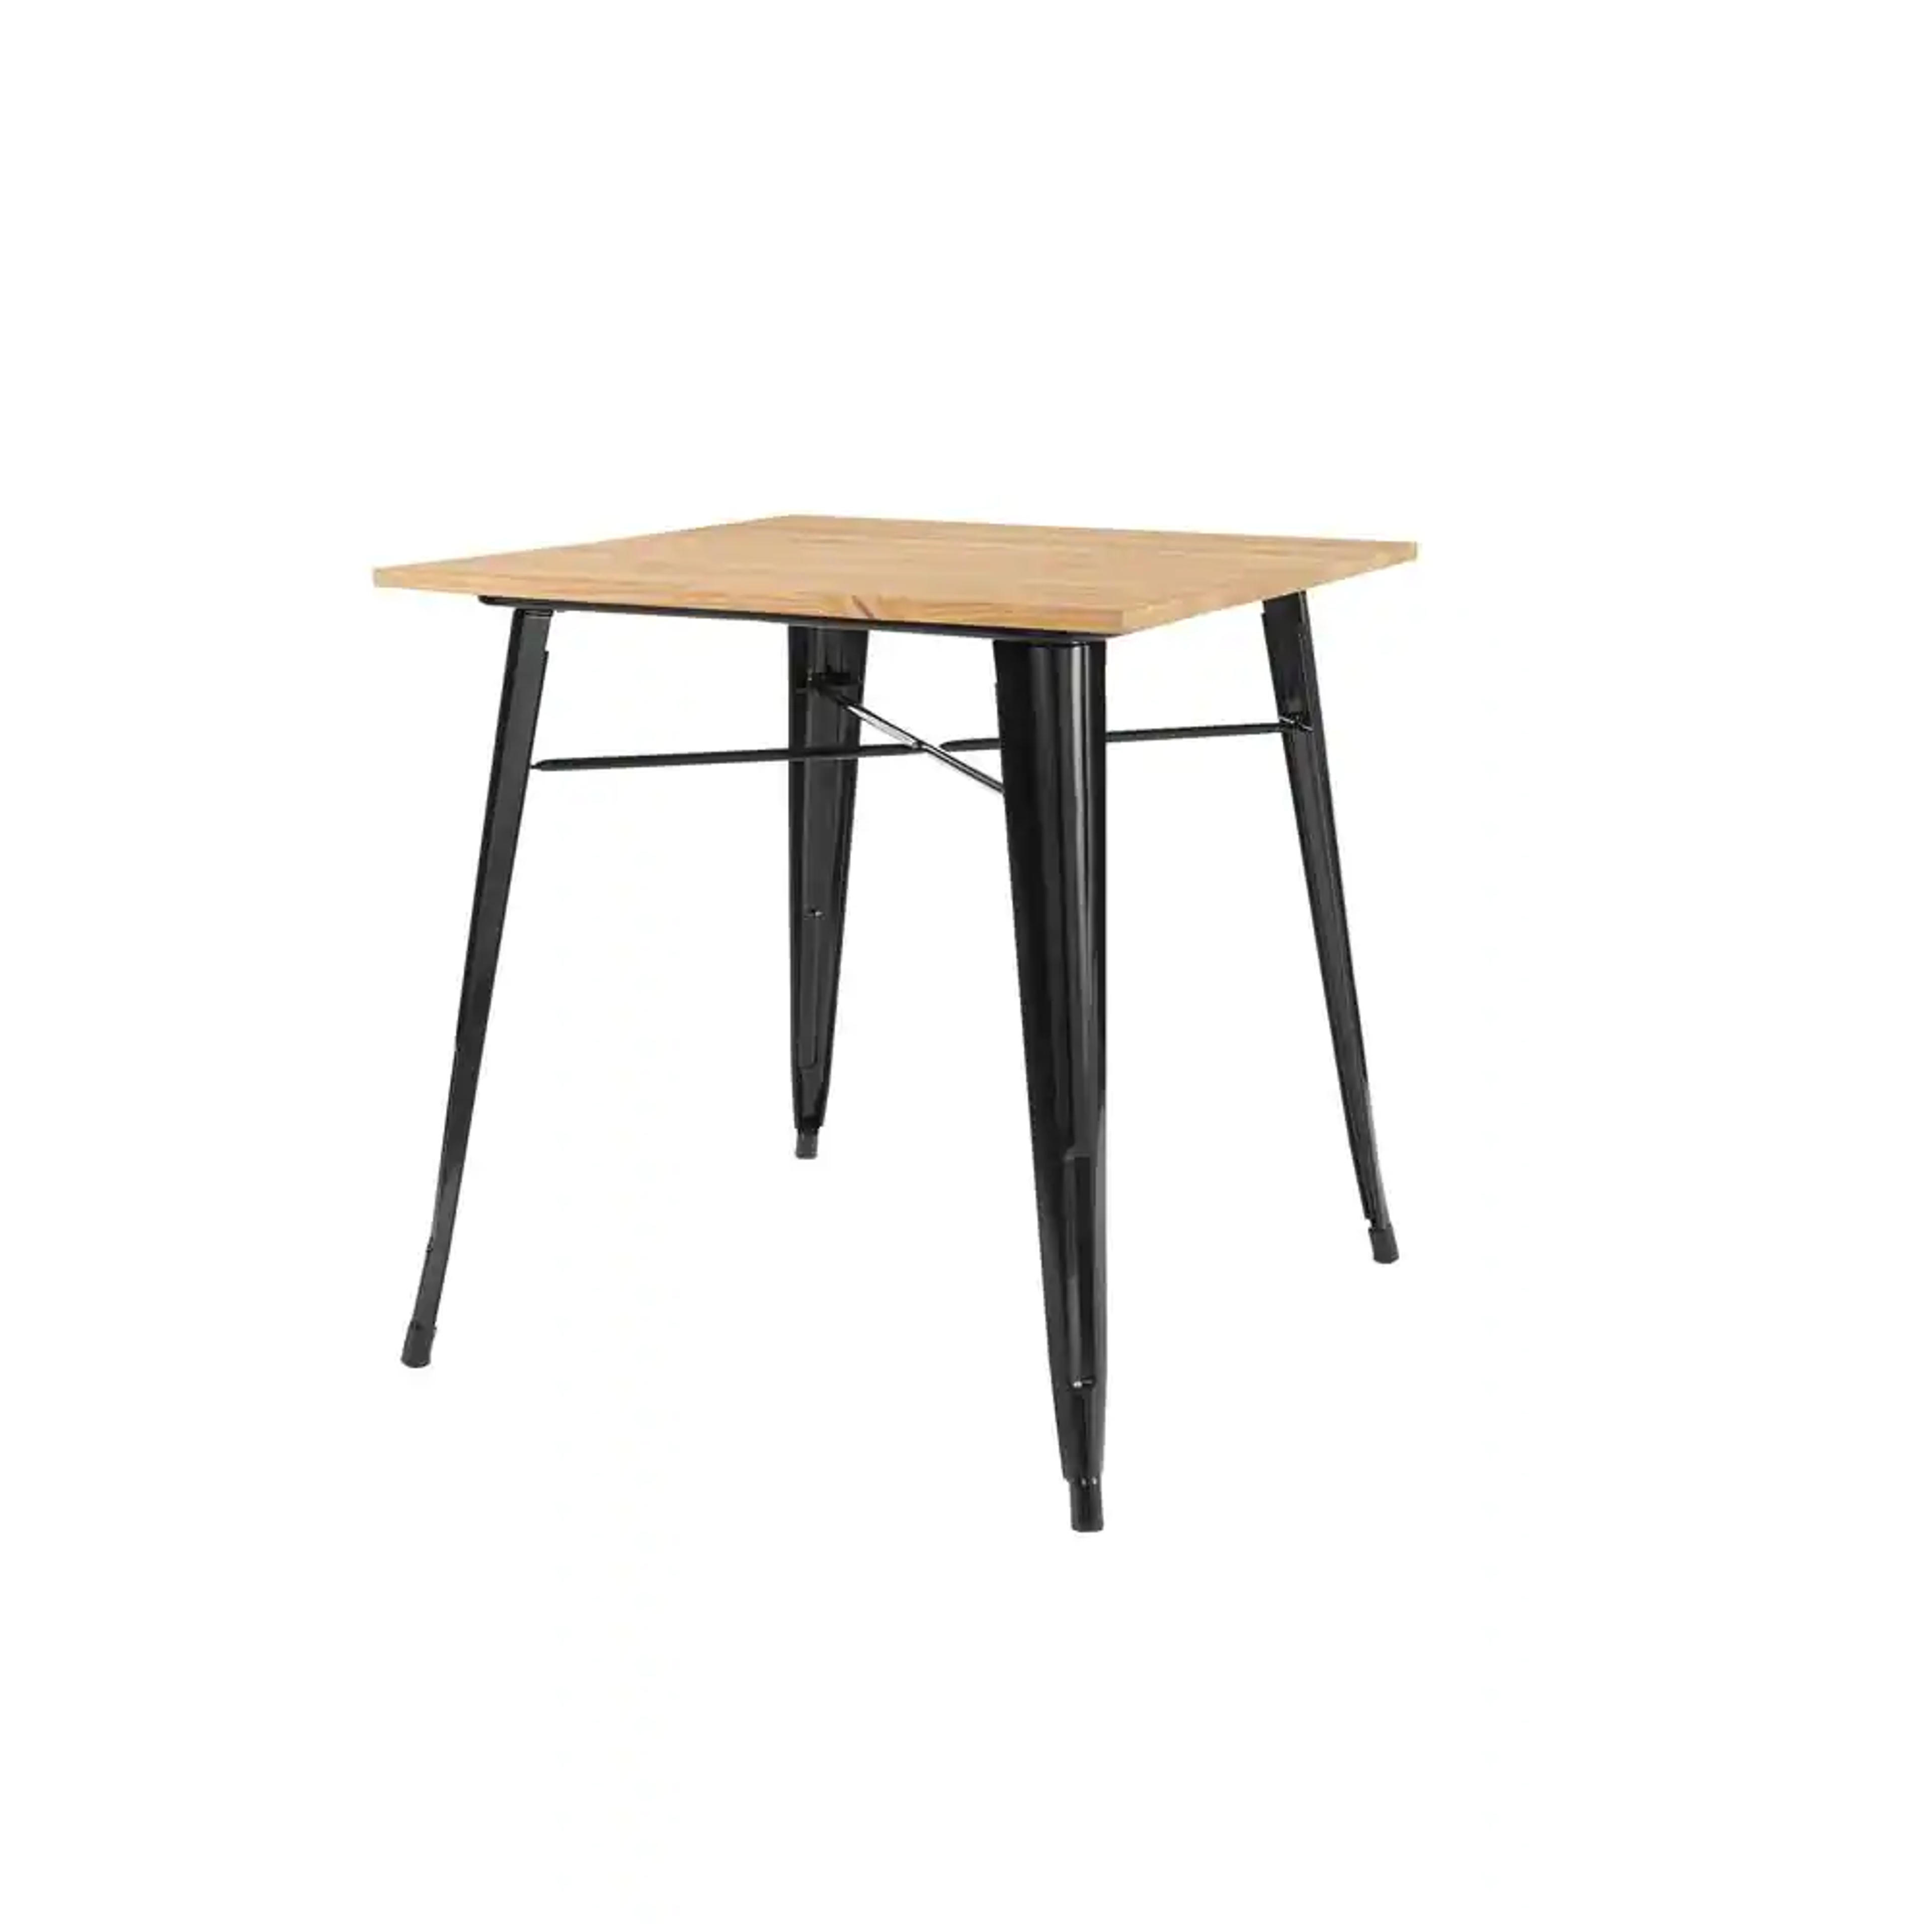 StyleWell Finwick Black Metal Square Dining Table for 4 (31.5 in. L x 29.13 in. H) TW801-BLK - The Home Depot